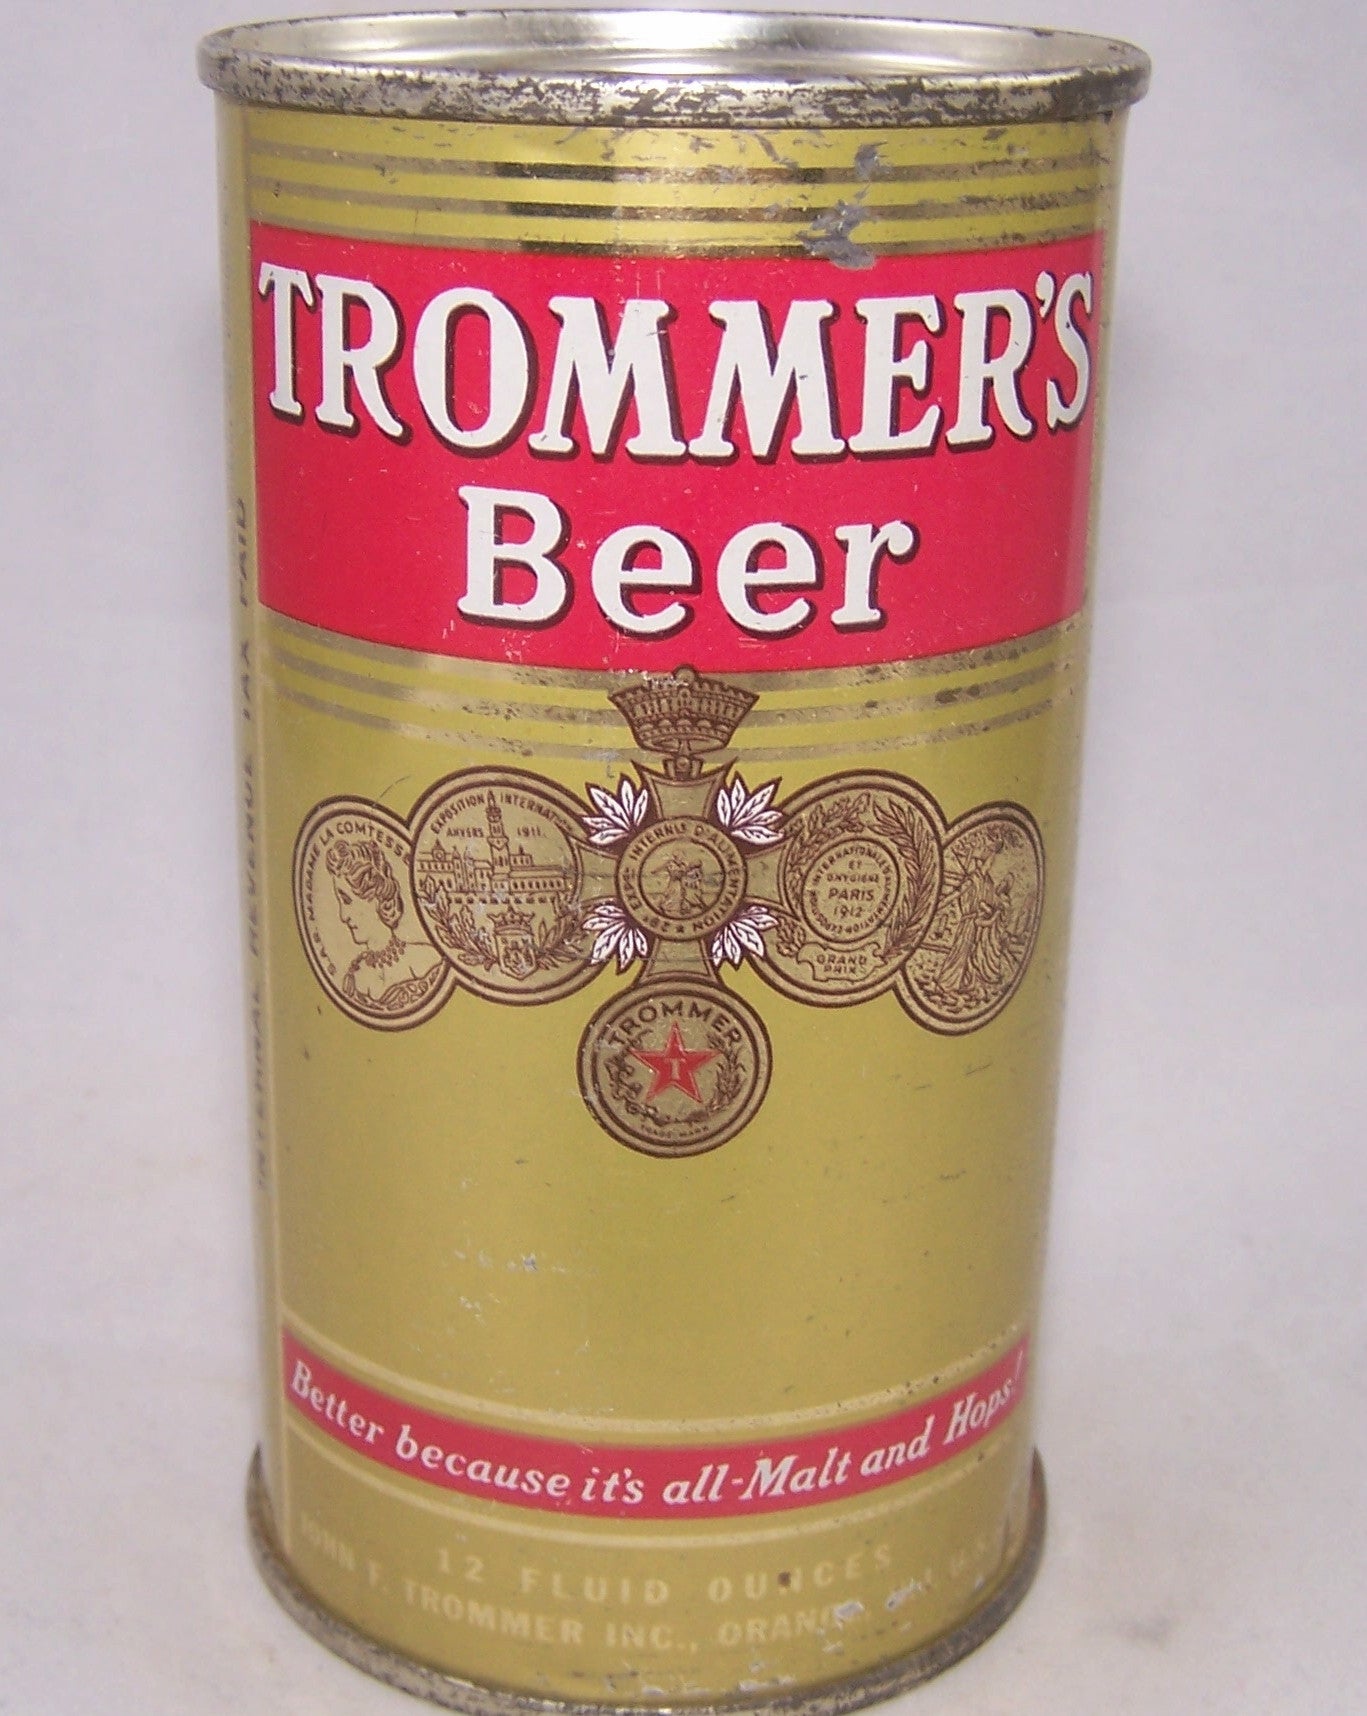 Trommer's Beer, USBC 139-37, Grade 1 to 1/1+ Sold on 03/26/17